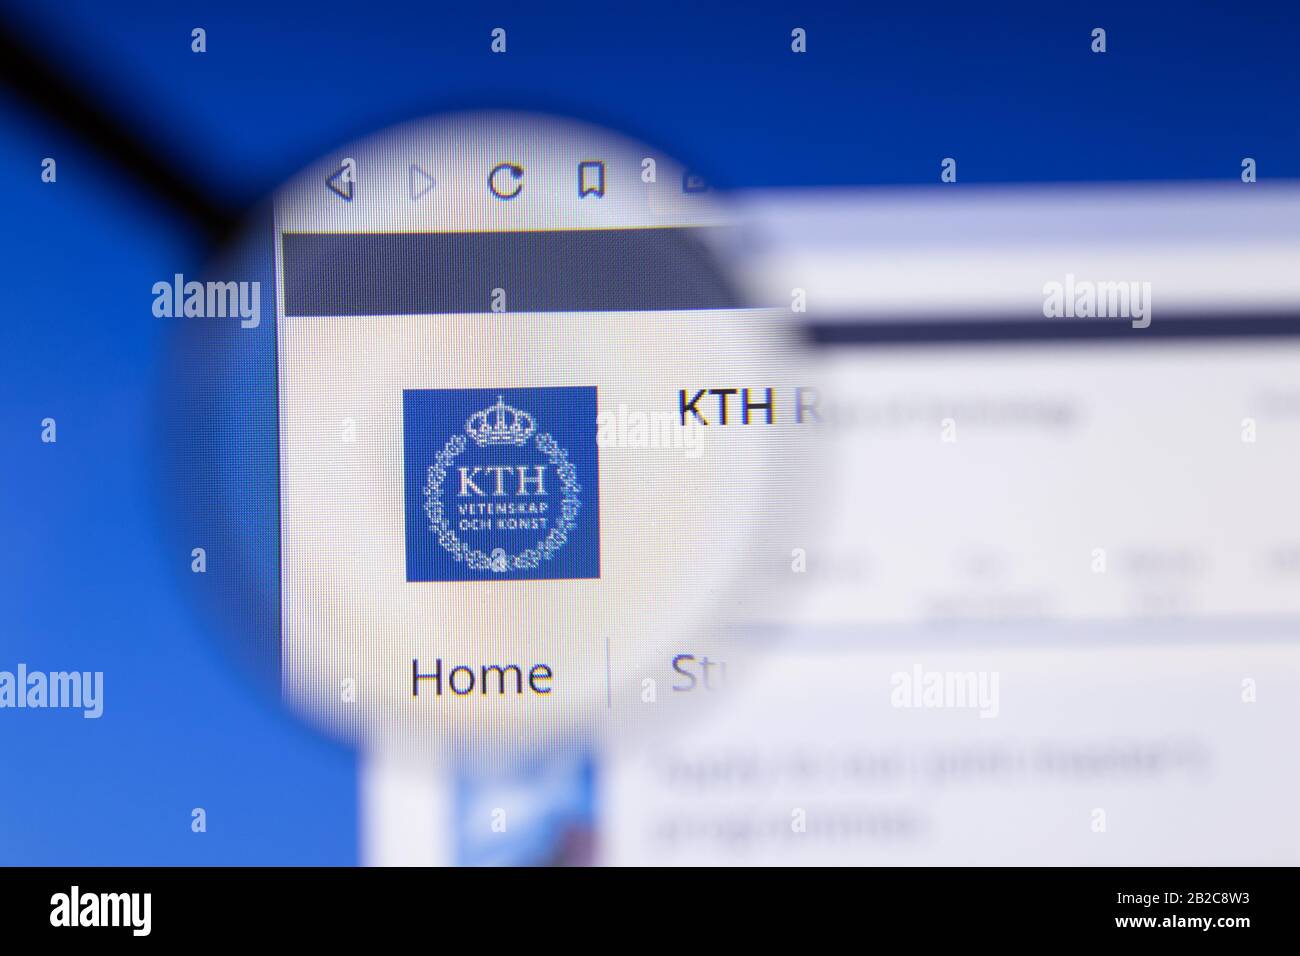 Los Angeles, California, USA - 3 March 2020: KTH Royal Institute of Technology website homepage logo visible on display screen, Illustrative Editorial Stock Photo